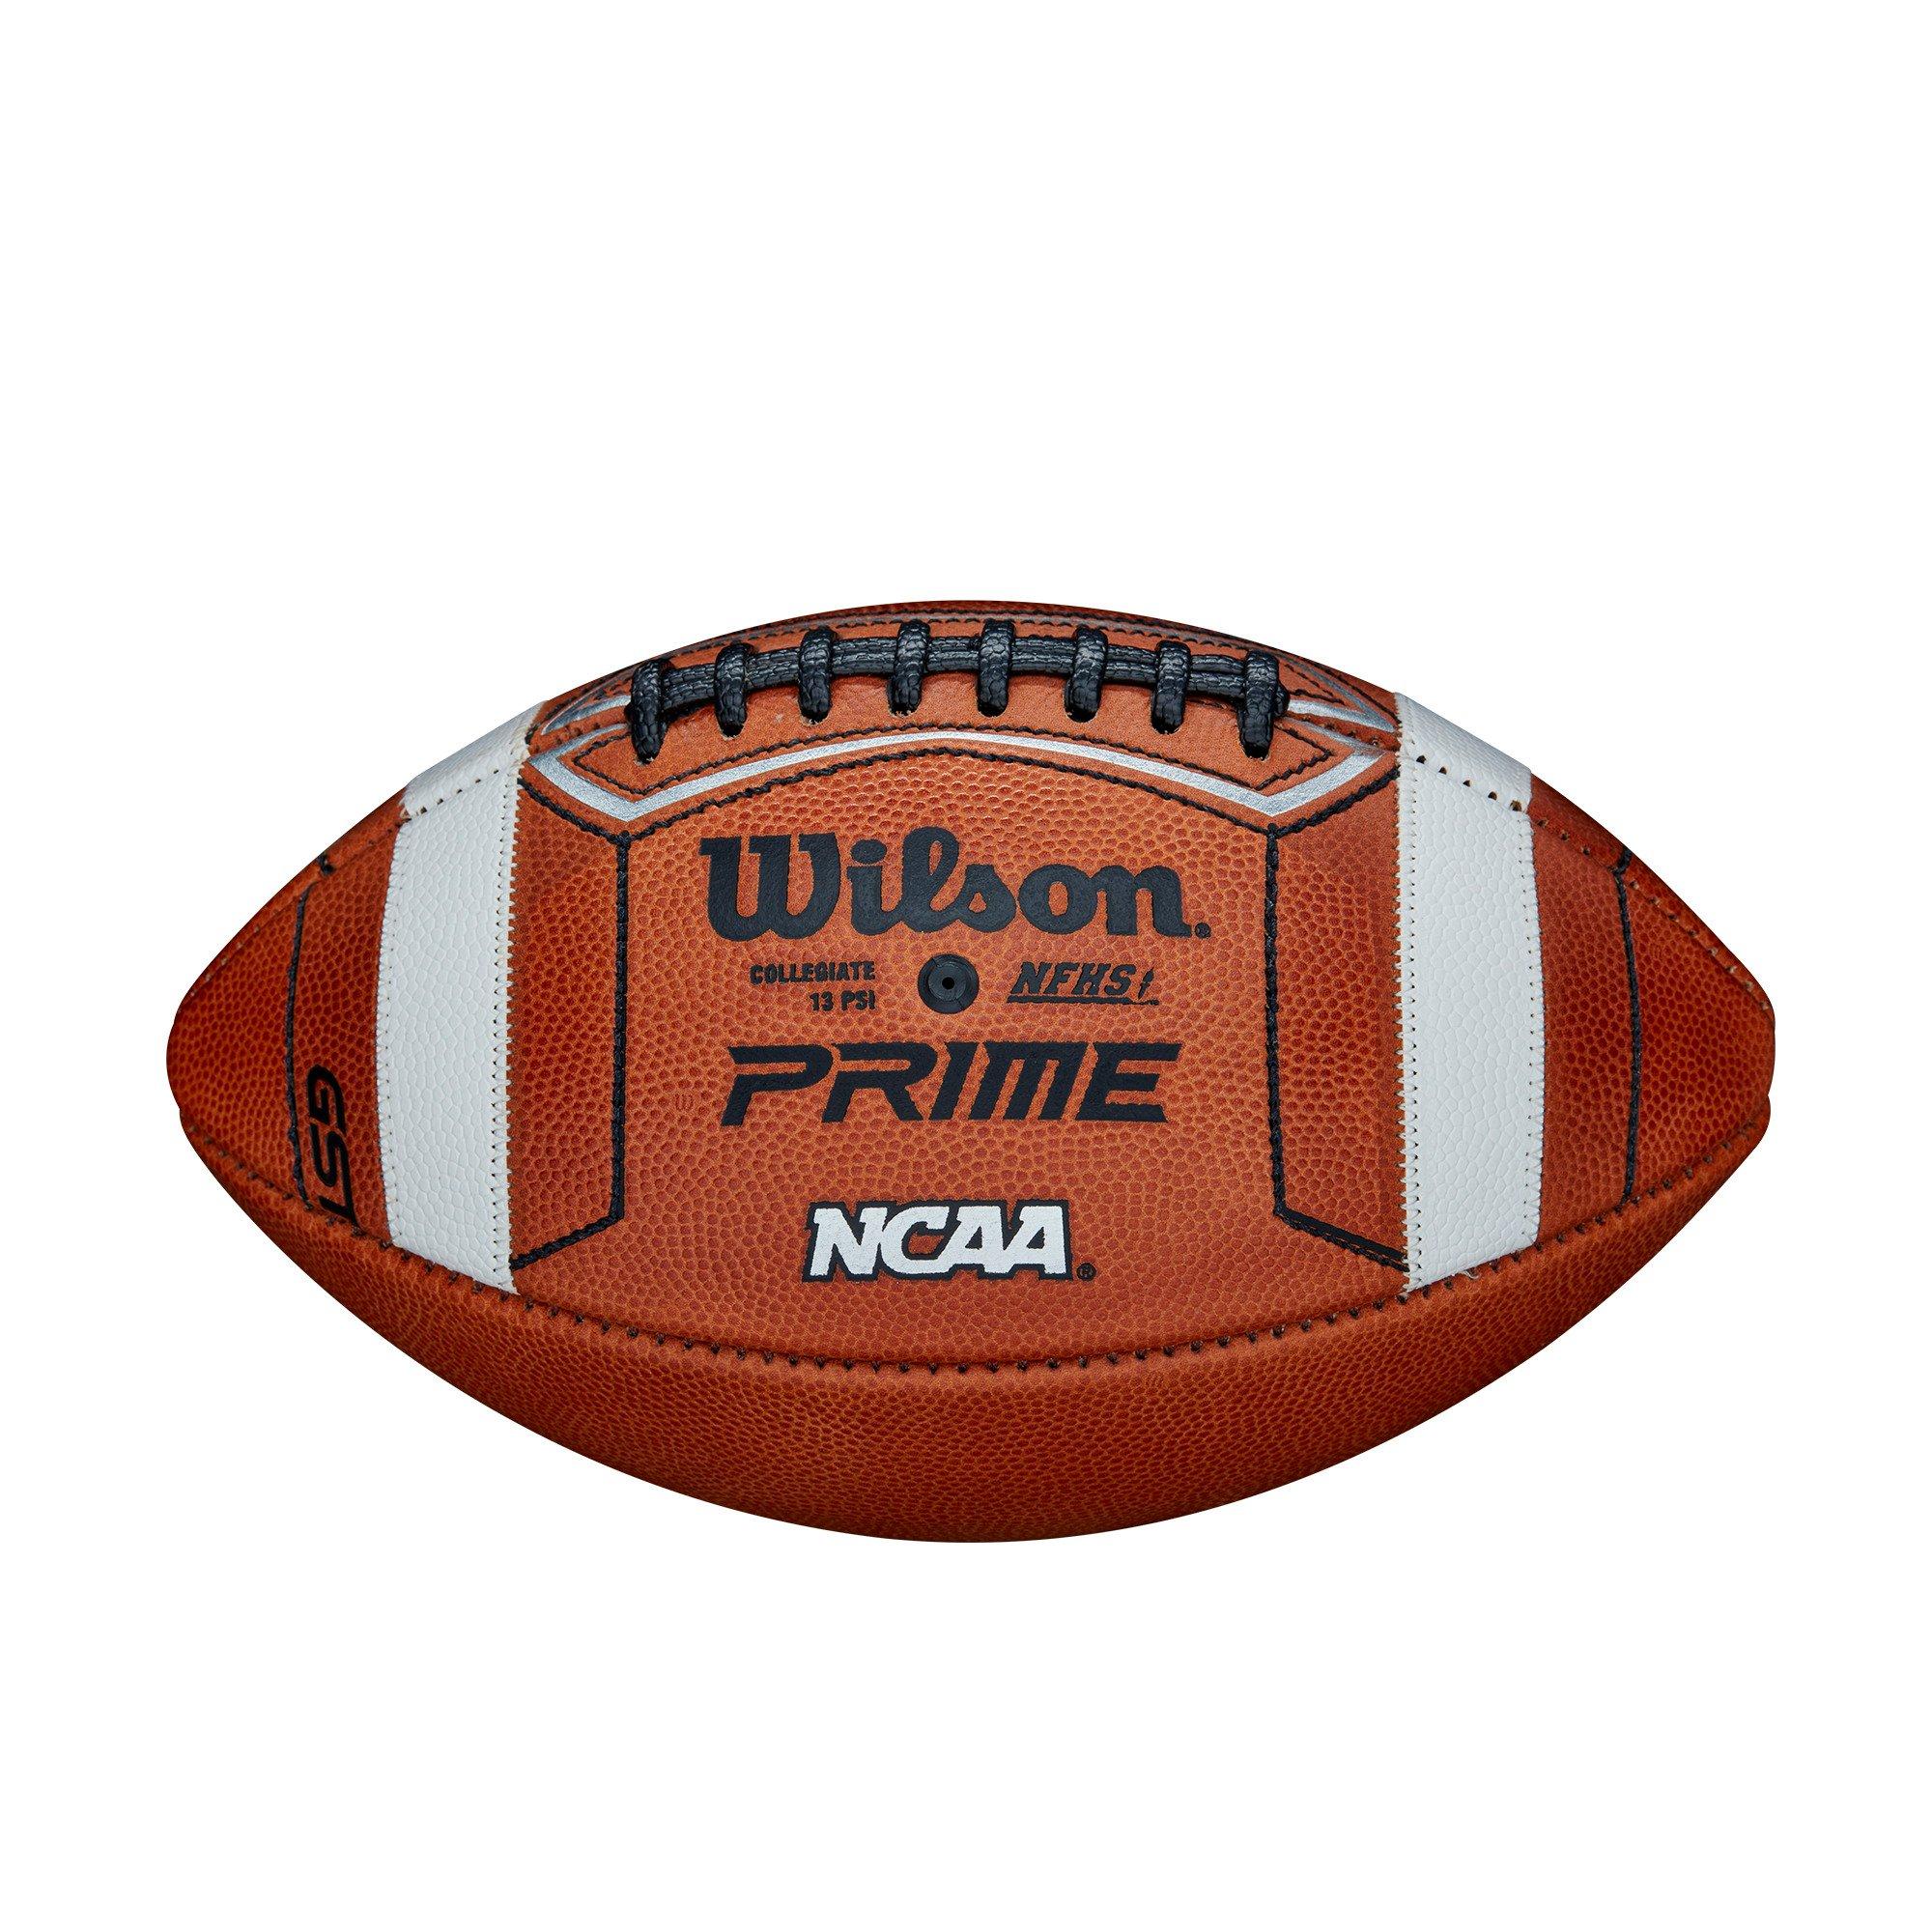 the nfl prime ball